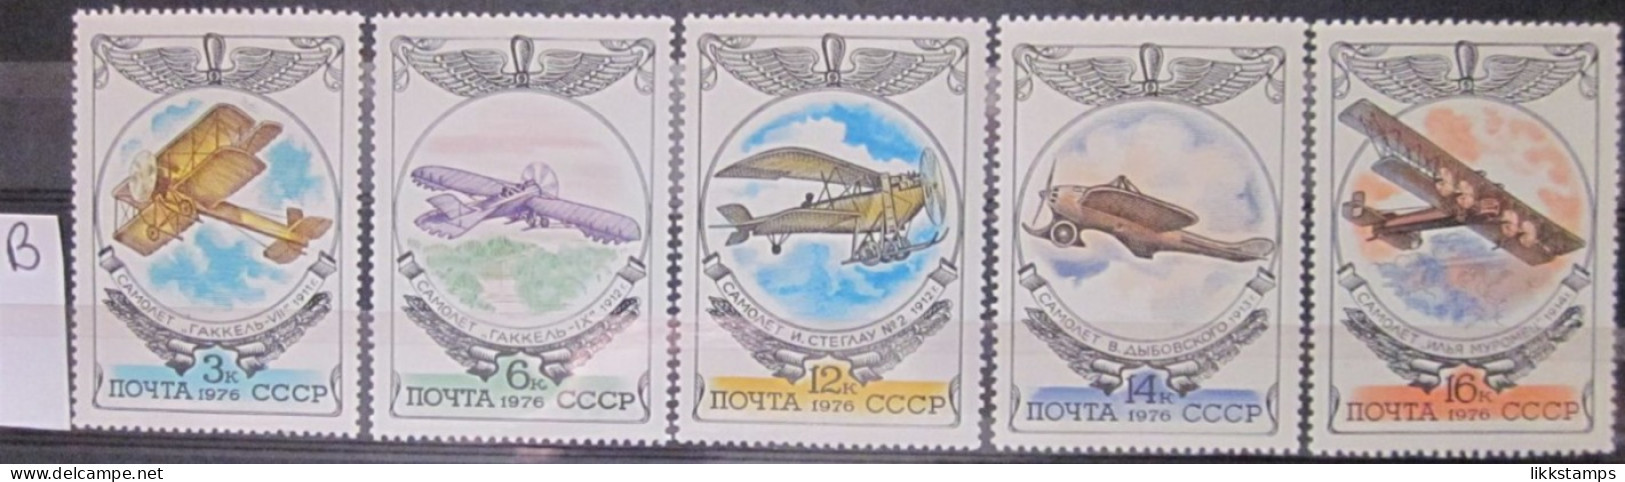 RUSSIA ~ 1976 ~ S.G. NUMBERS 4580 - 4584. ~ 'LOT B' ~ AIRCRAFT. ~ MNH #03584 - Nuevos